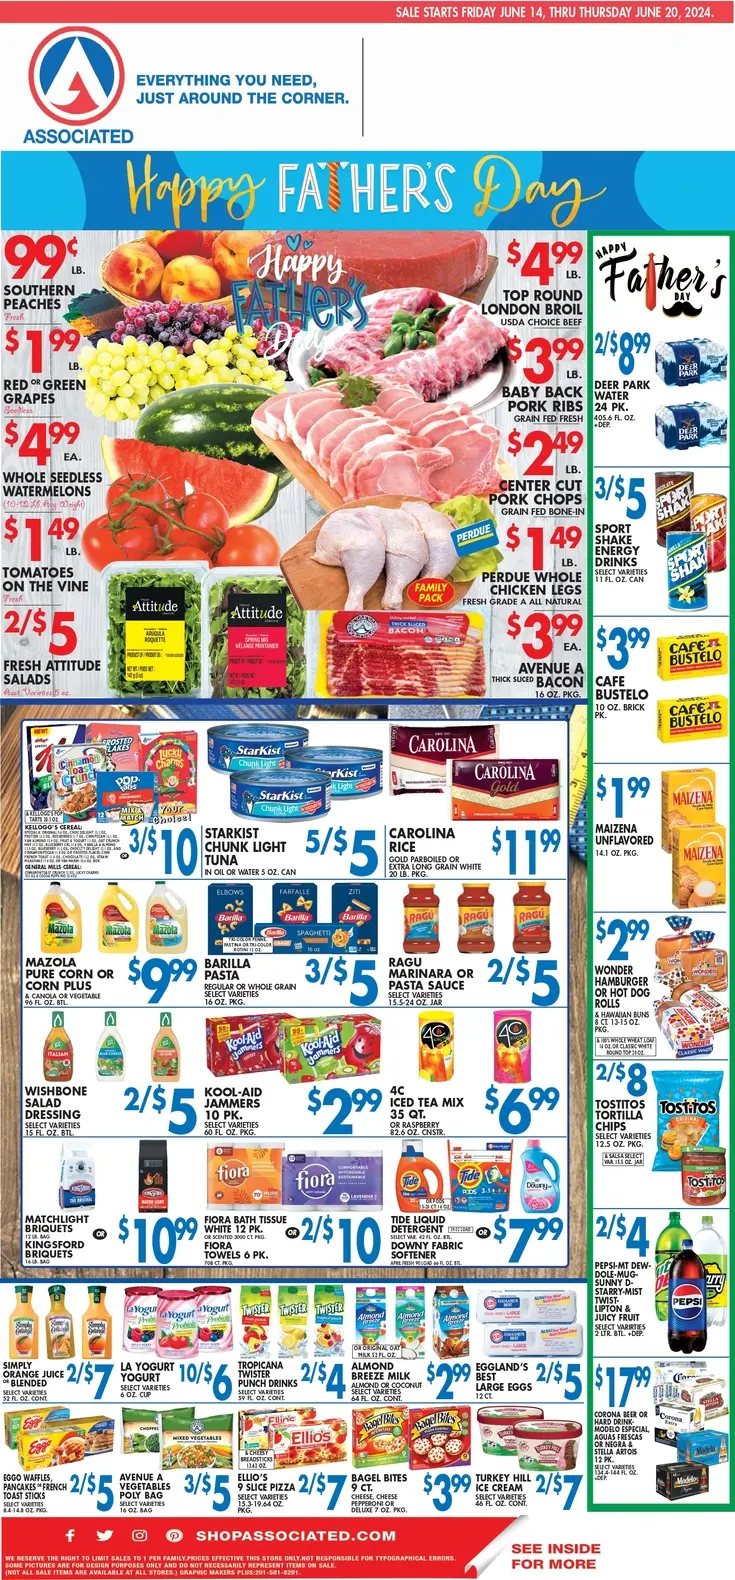 Associated Supermarkets July 2024 Weekly Sales, Deals, Discounts and Digital Coupons.